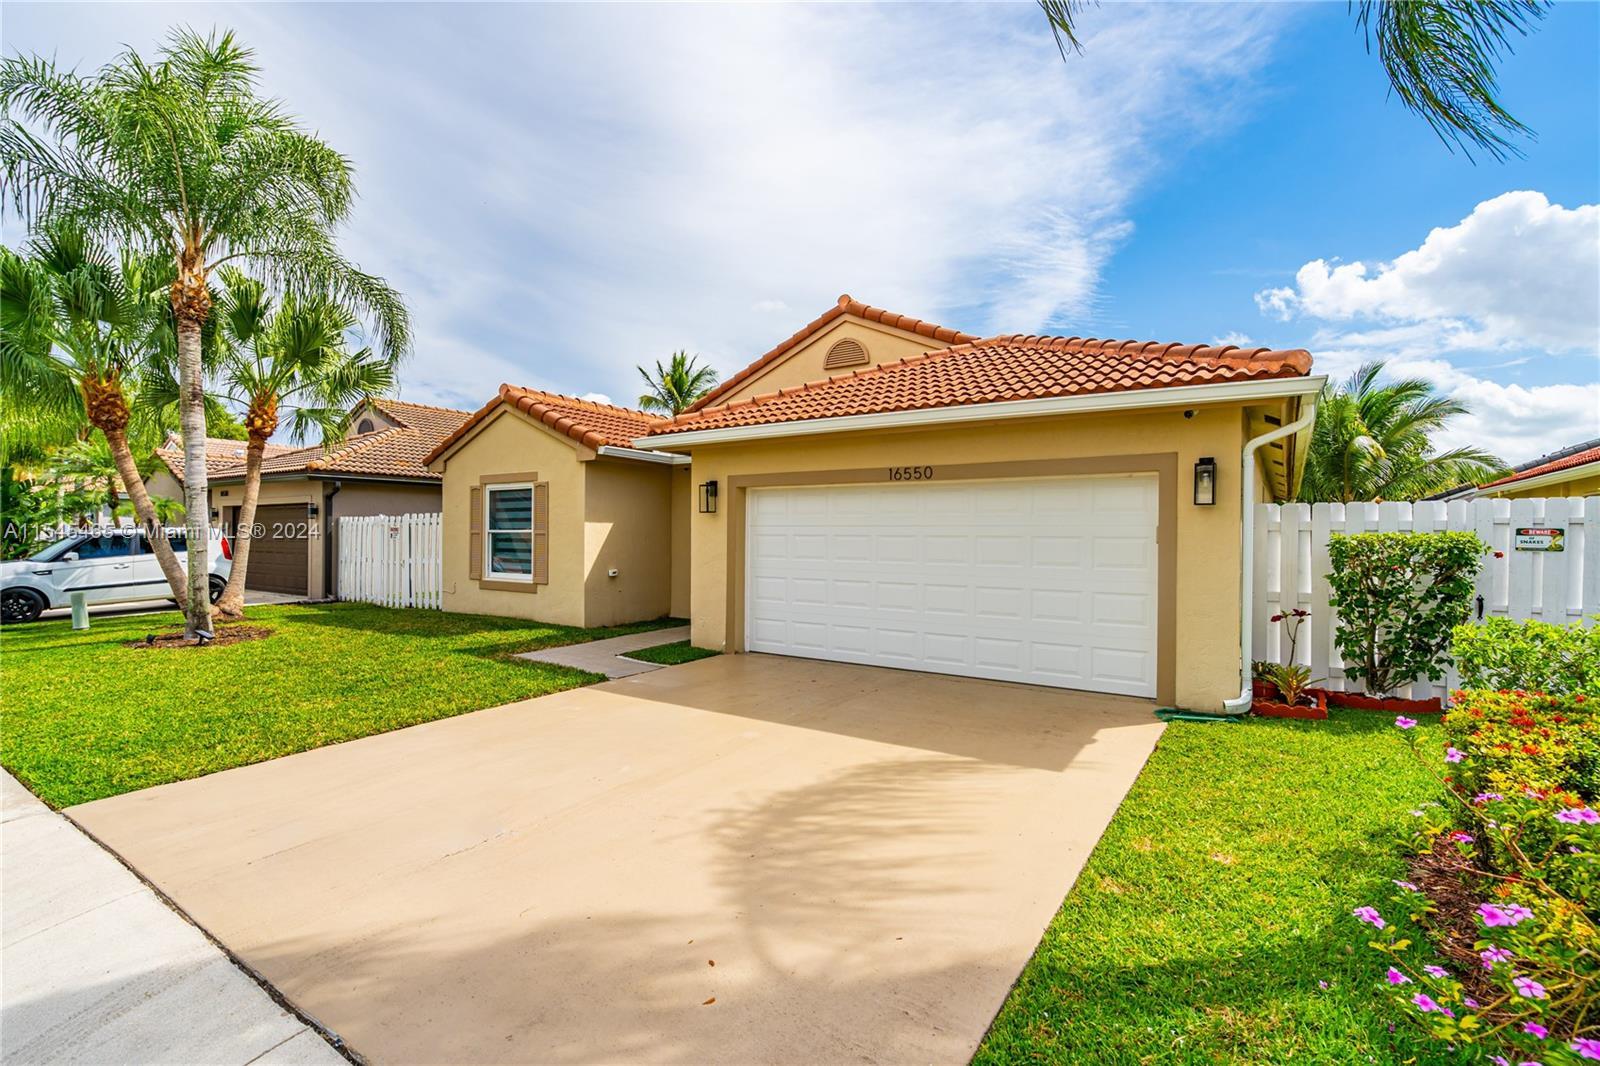 Photo of 16550 NW 9th St in Pembroke Pines, FL